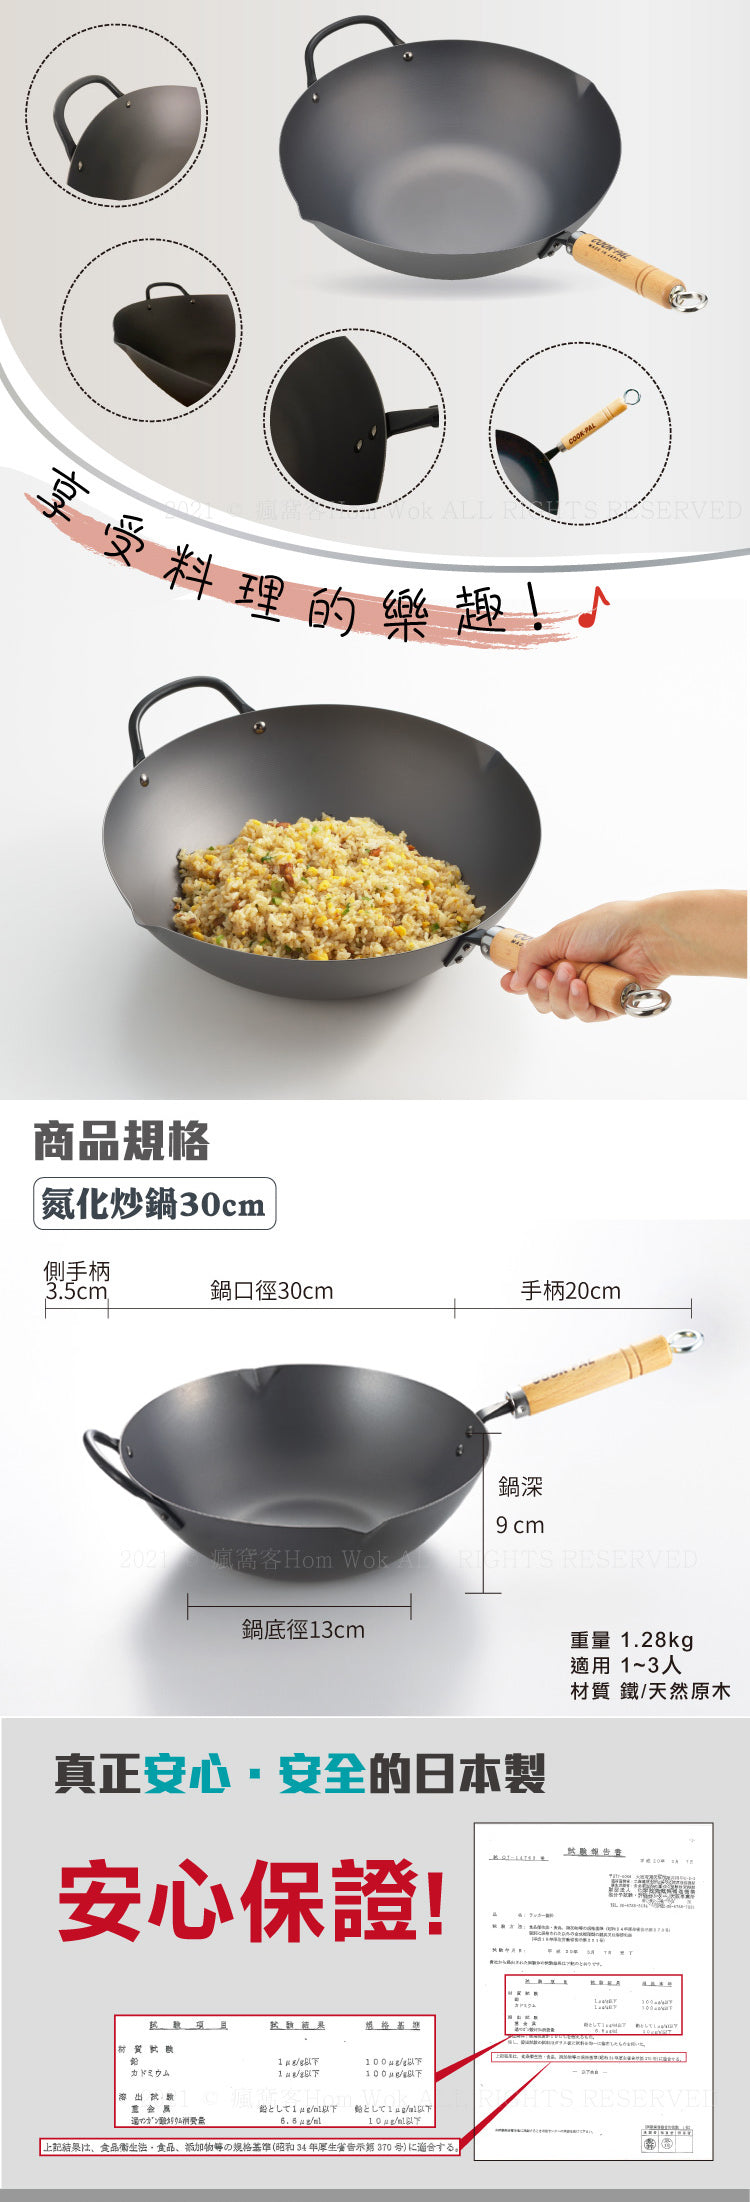 Yoshikawa Cook-Pal Ren Beijing Wok 30/36CM Made in Japan (Included Lid Cover)